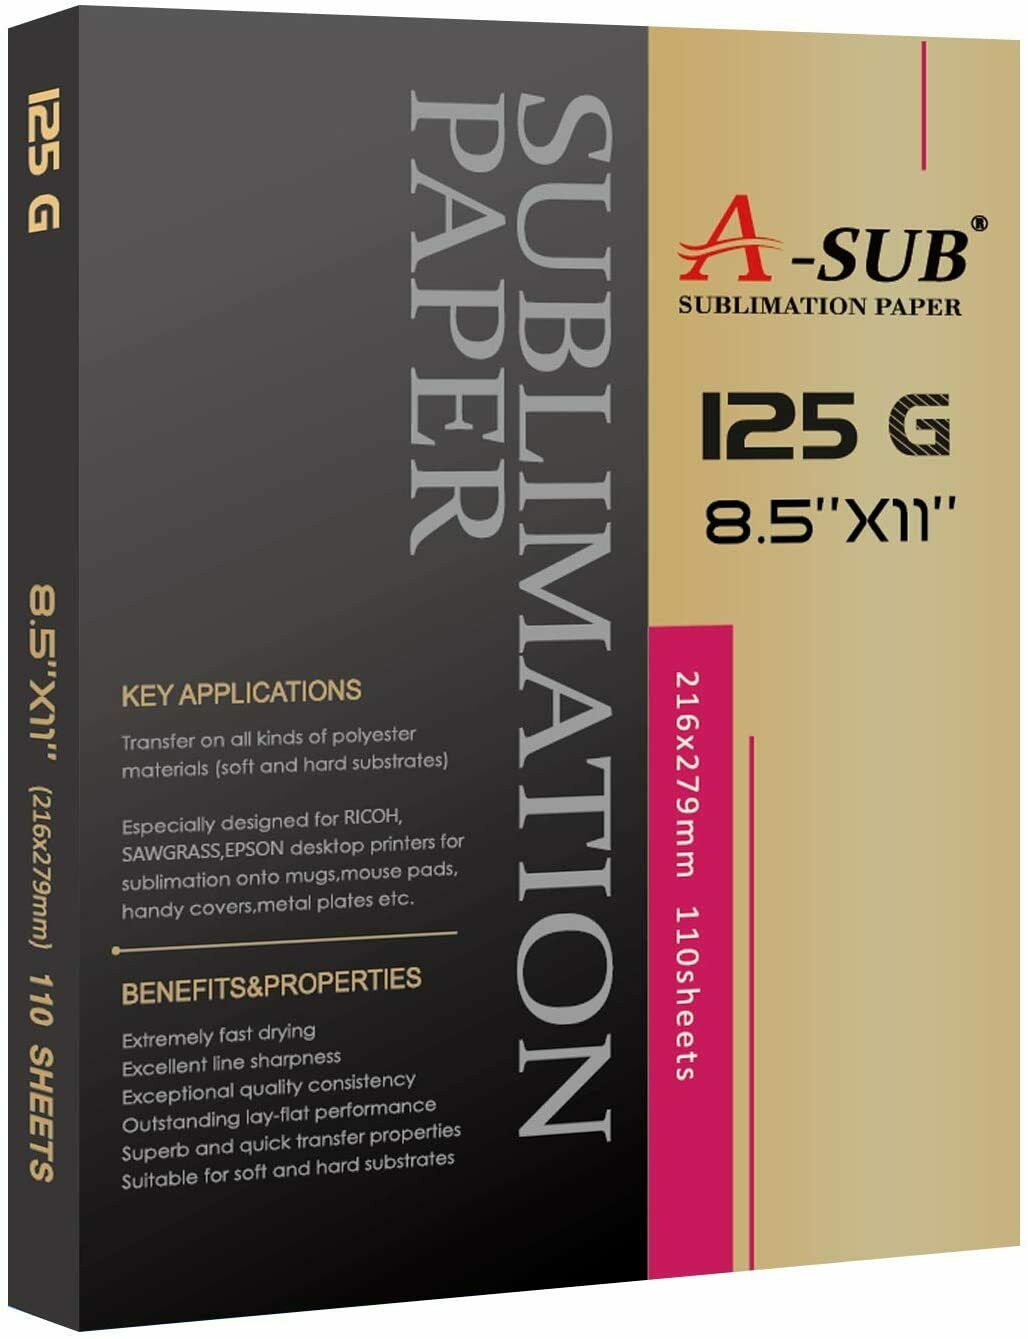 a-sub-sublimation-paper-8-5x11-inch-110-sheets-for-any-inkjet-printer